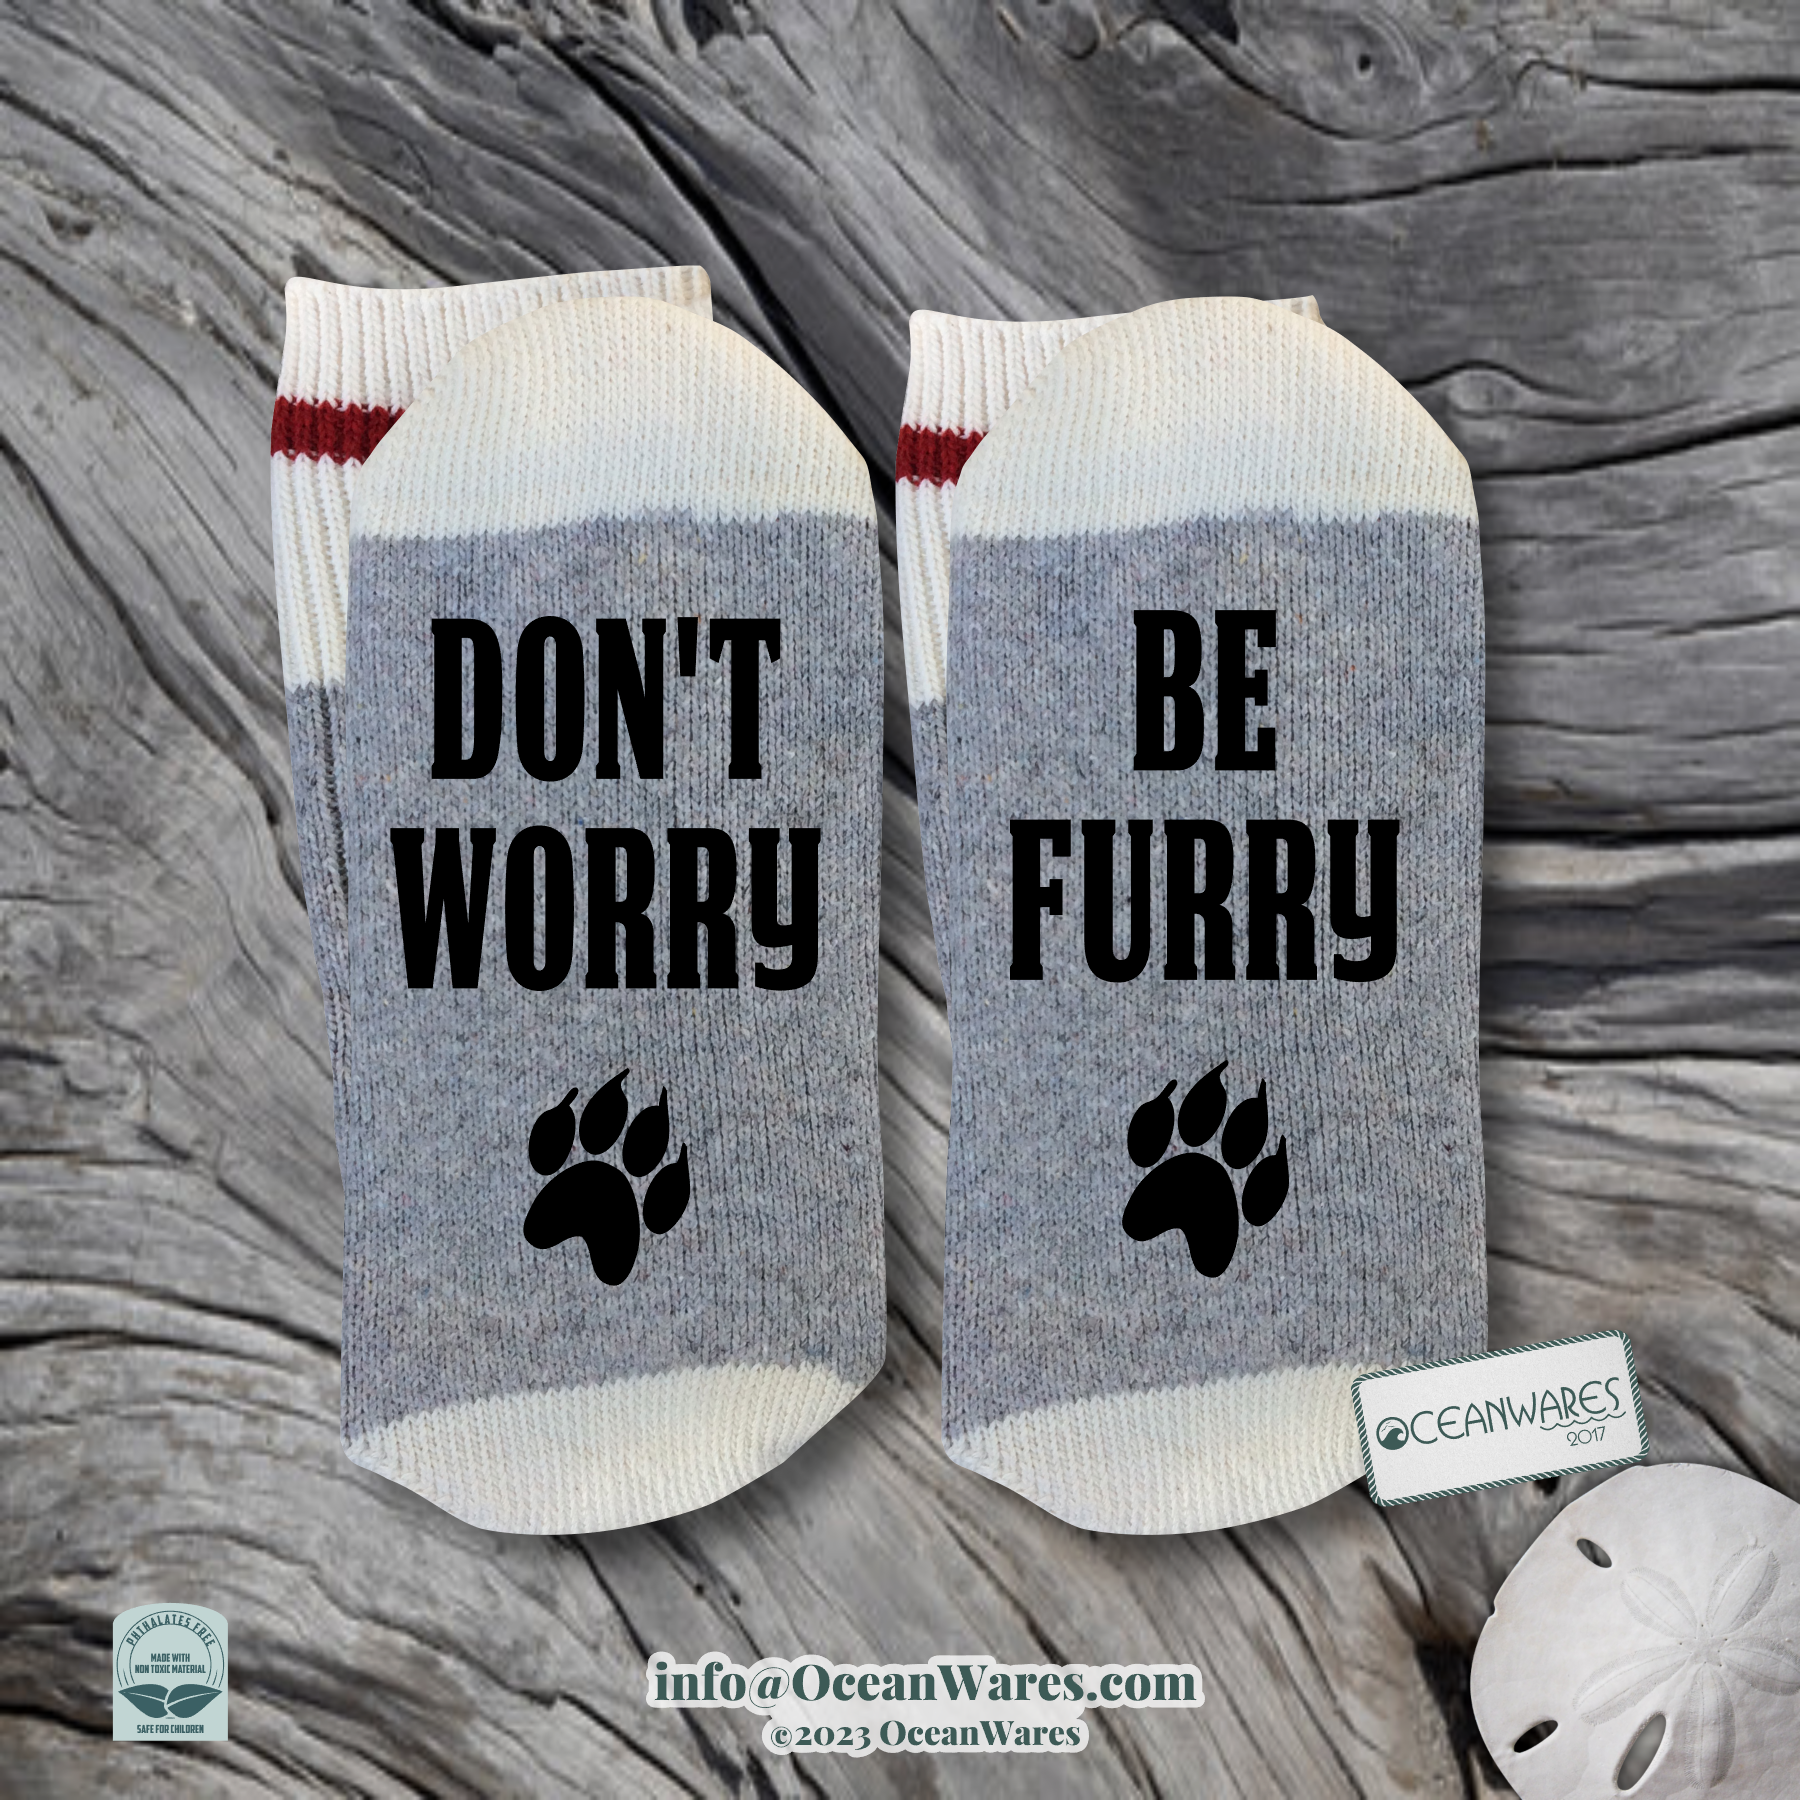 Don't worry, Be Furry, SUPER SOFT NOVELTY WORD SOCKS.